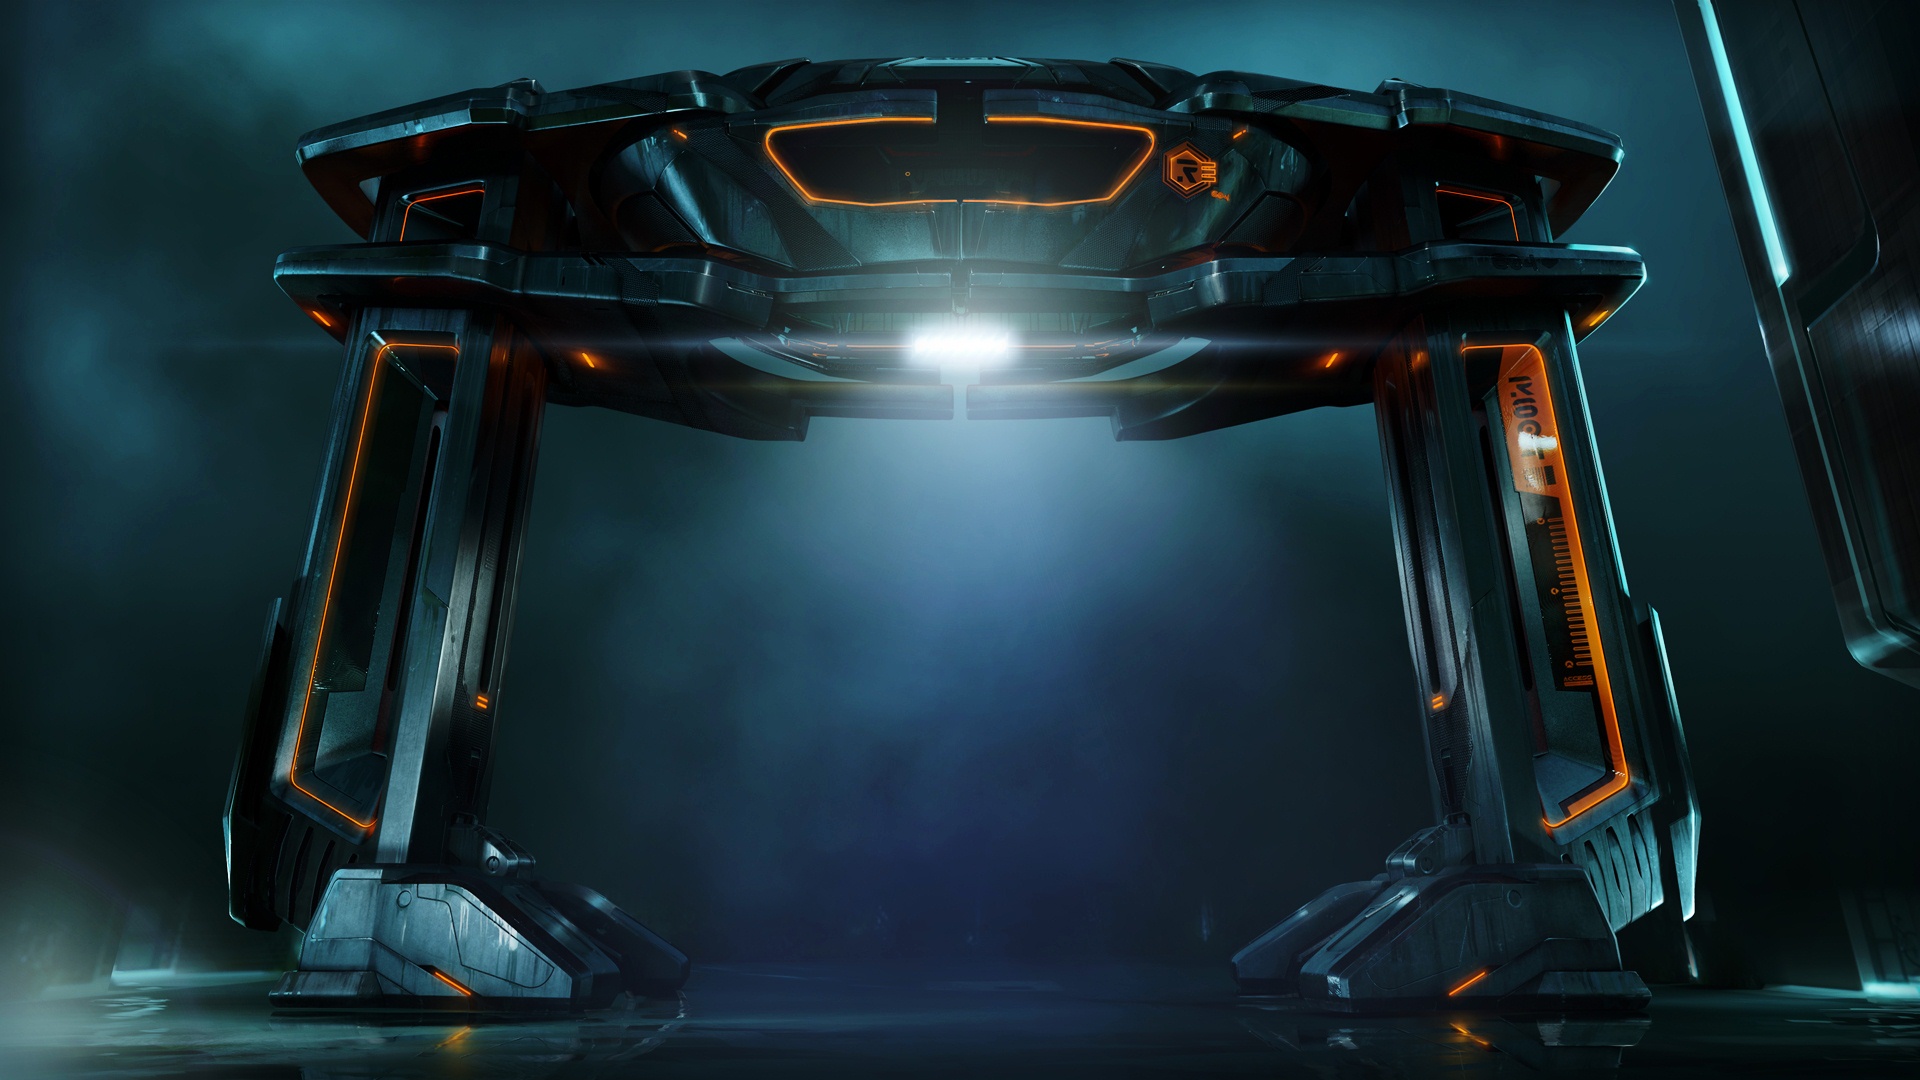 Dark TRON: Legacy CGI-themed wallpaper for movie enthusiasts.